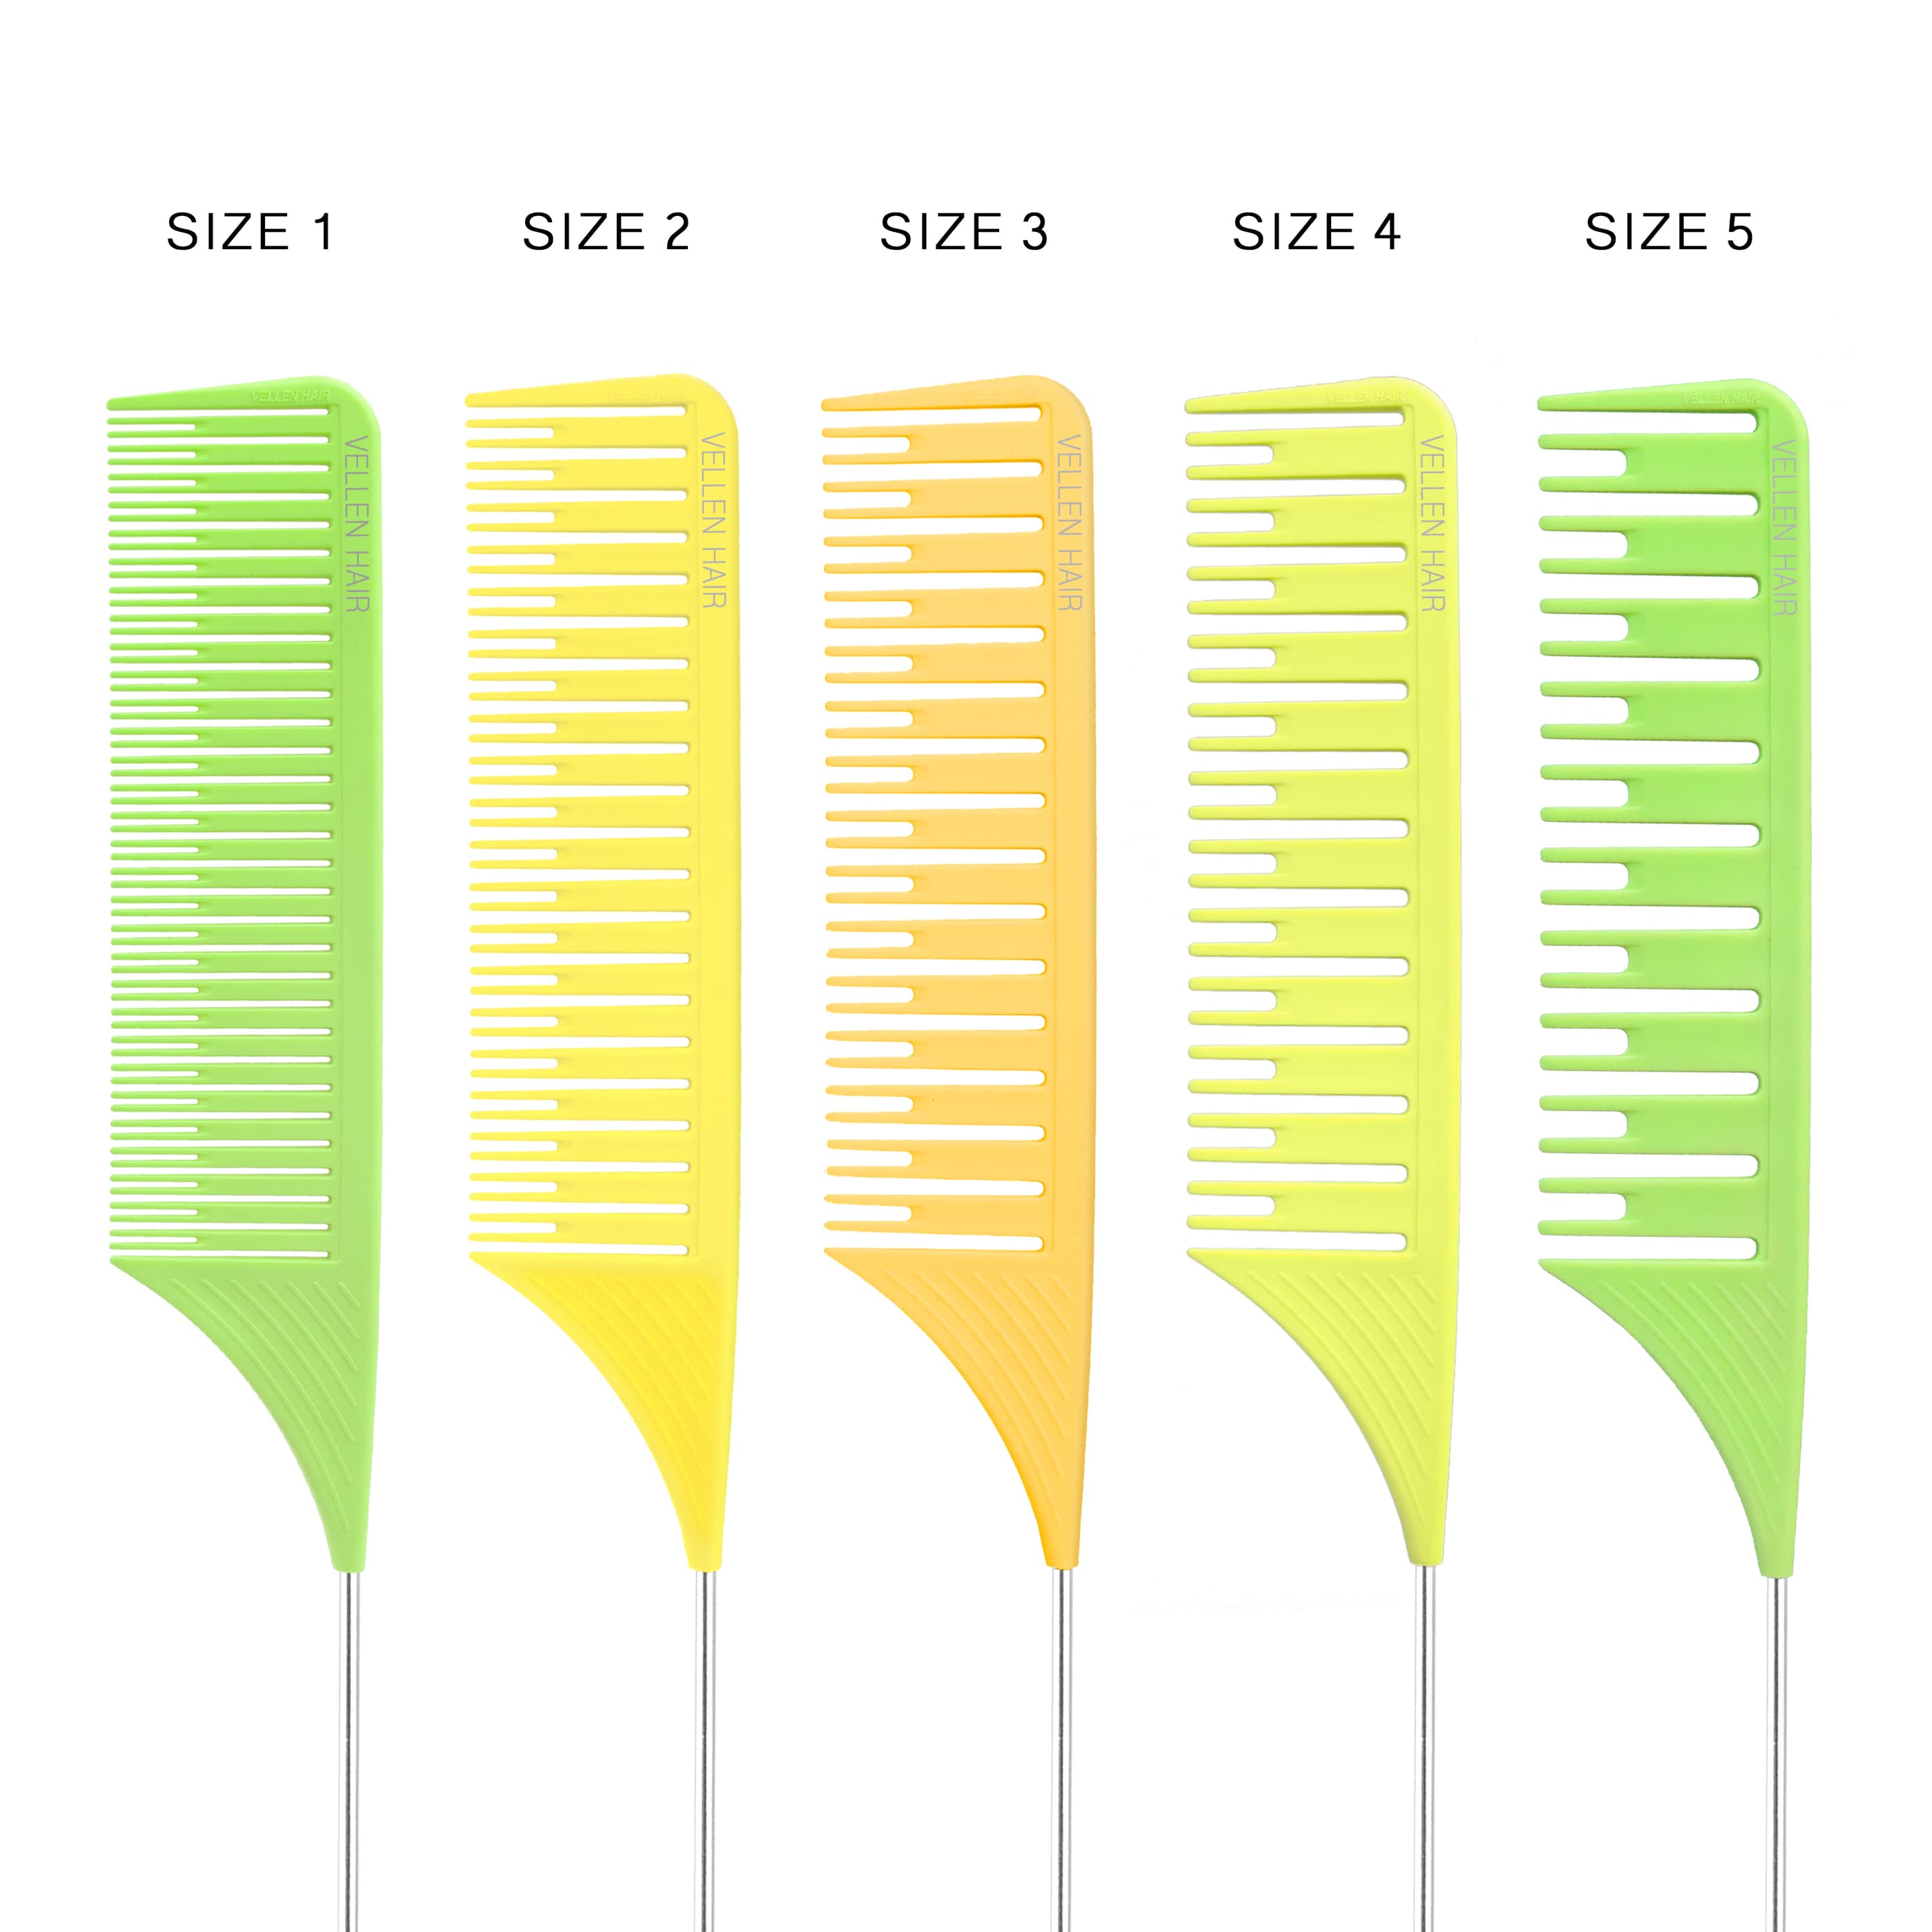 Highlighting Comb Set 1.0 - 5 Sizes - Multi Colors